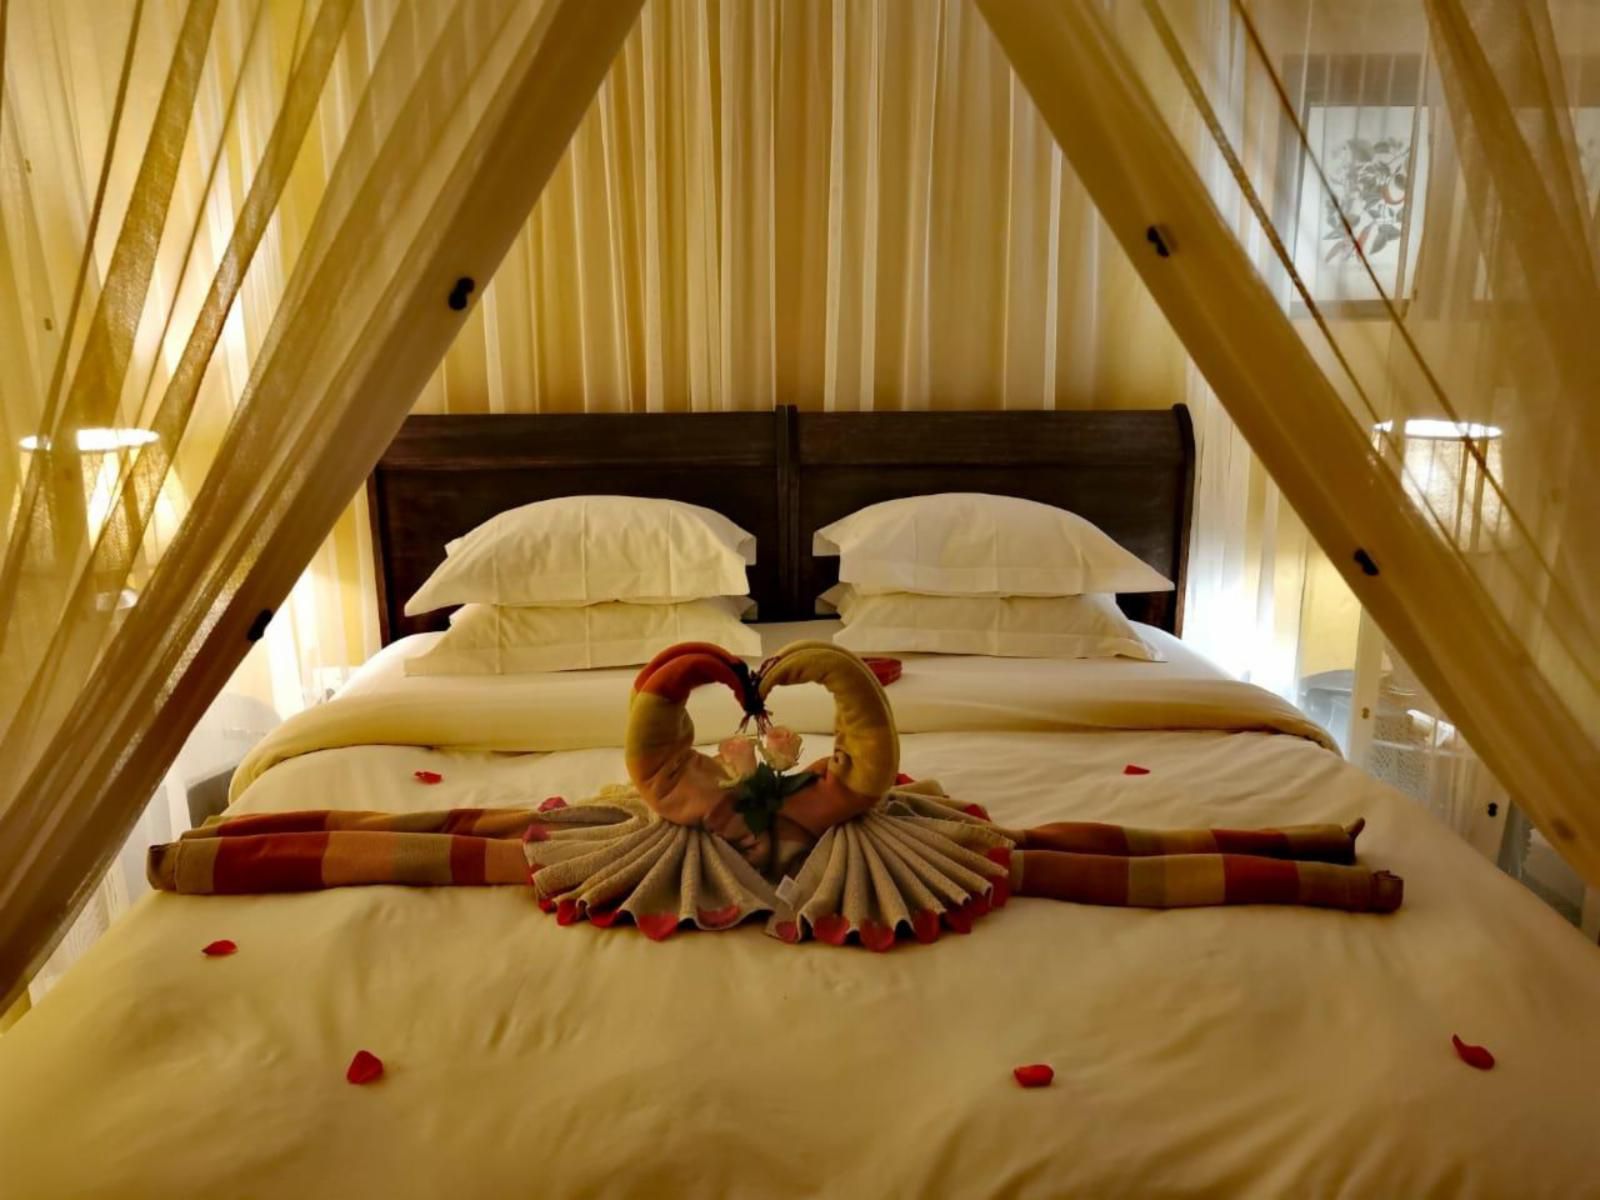 Motswiri Private Safari Lodge Madikwe Game Reserve North West Province South Africa Colorful, Bedroom, Wedding